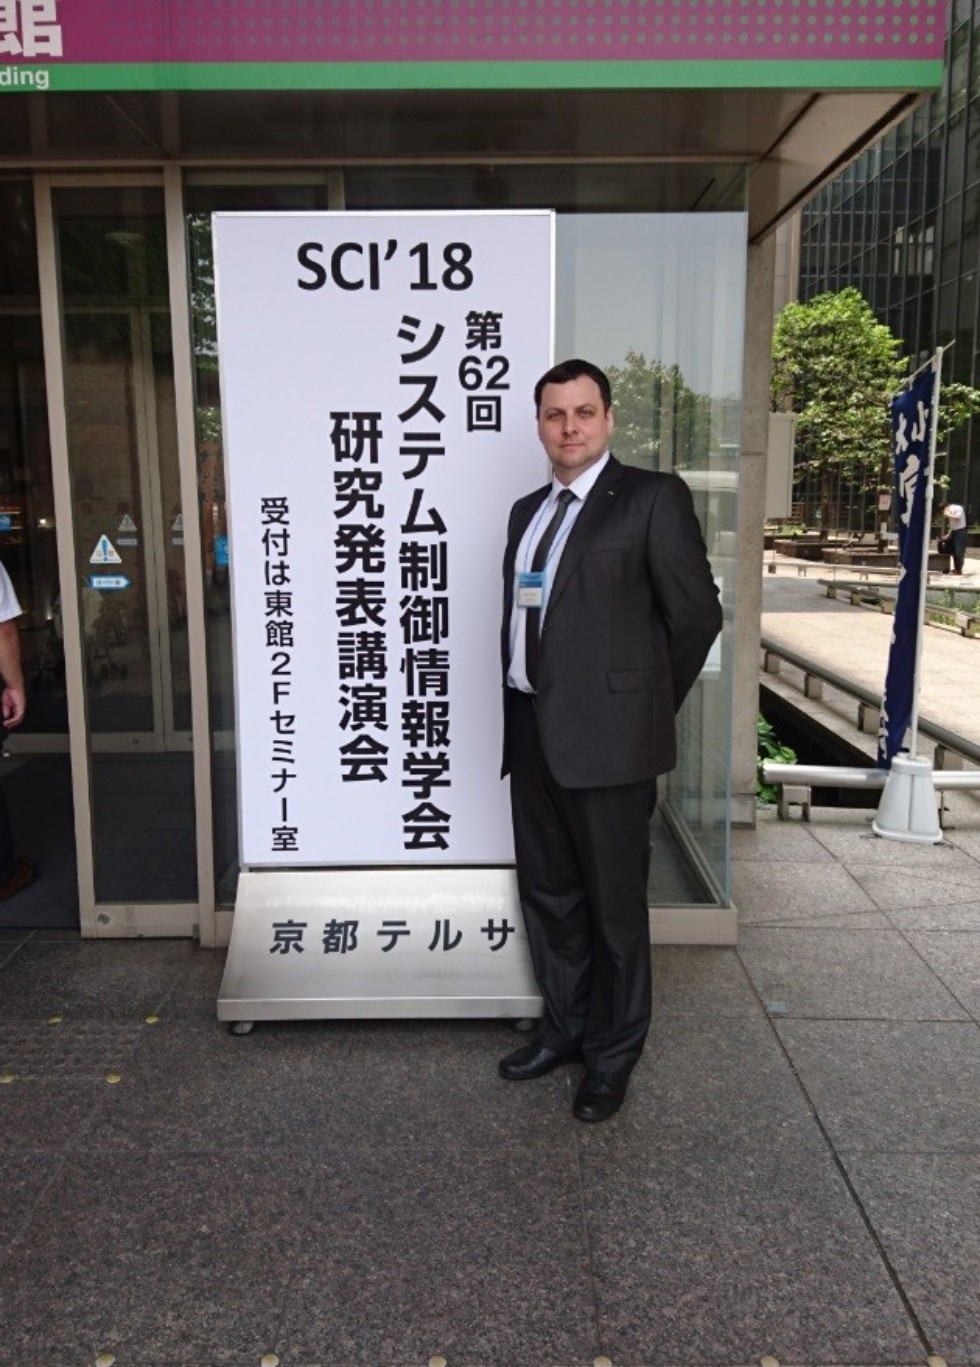 LIRS made research reports on swarm robotics at the International Conference on Systems, Control and Information Engineers in Japan ,LIRS, ITIS, robotics